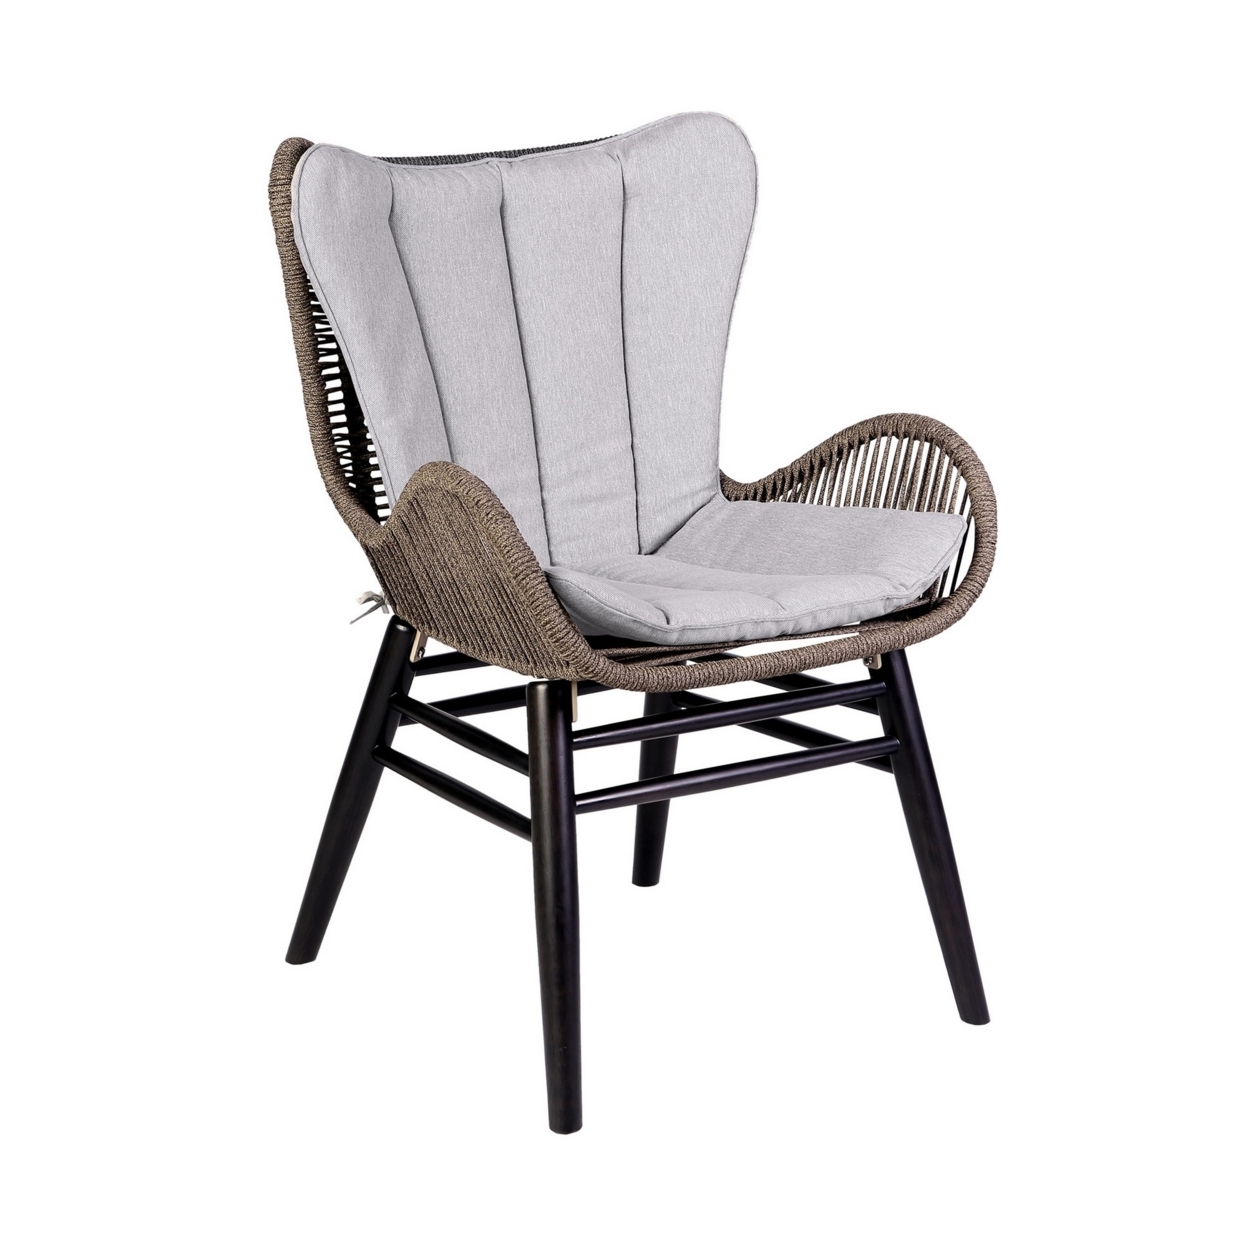 Luf 24 Inch Outdoor Dining Chair, Woven Rope Tuft, Curved Arms, Beige- Saltoro Sherpi